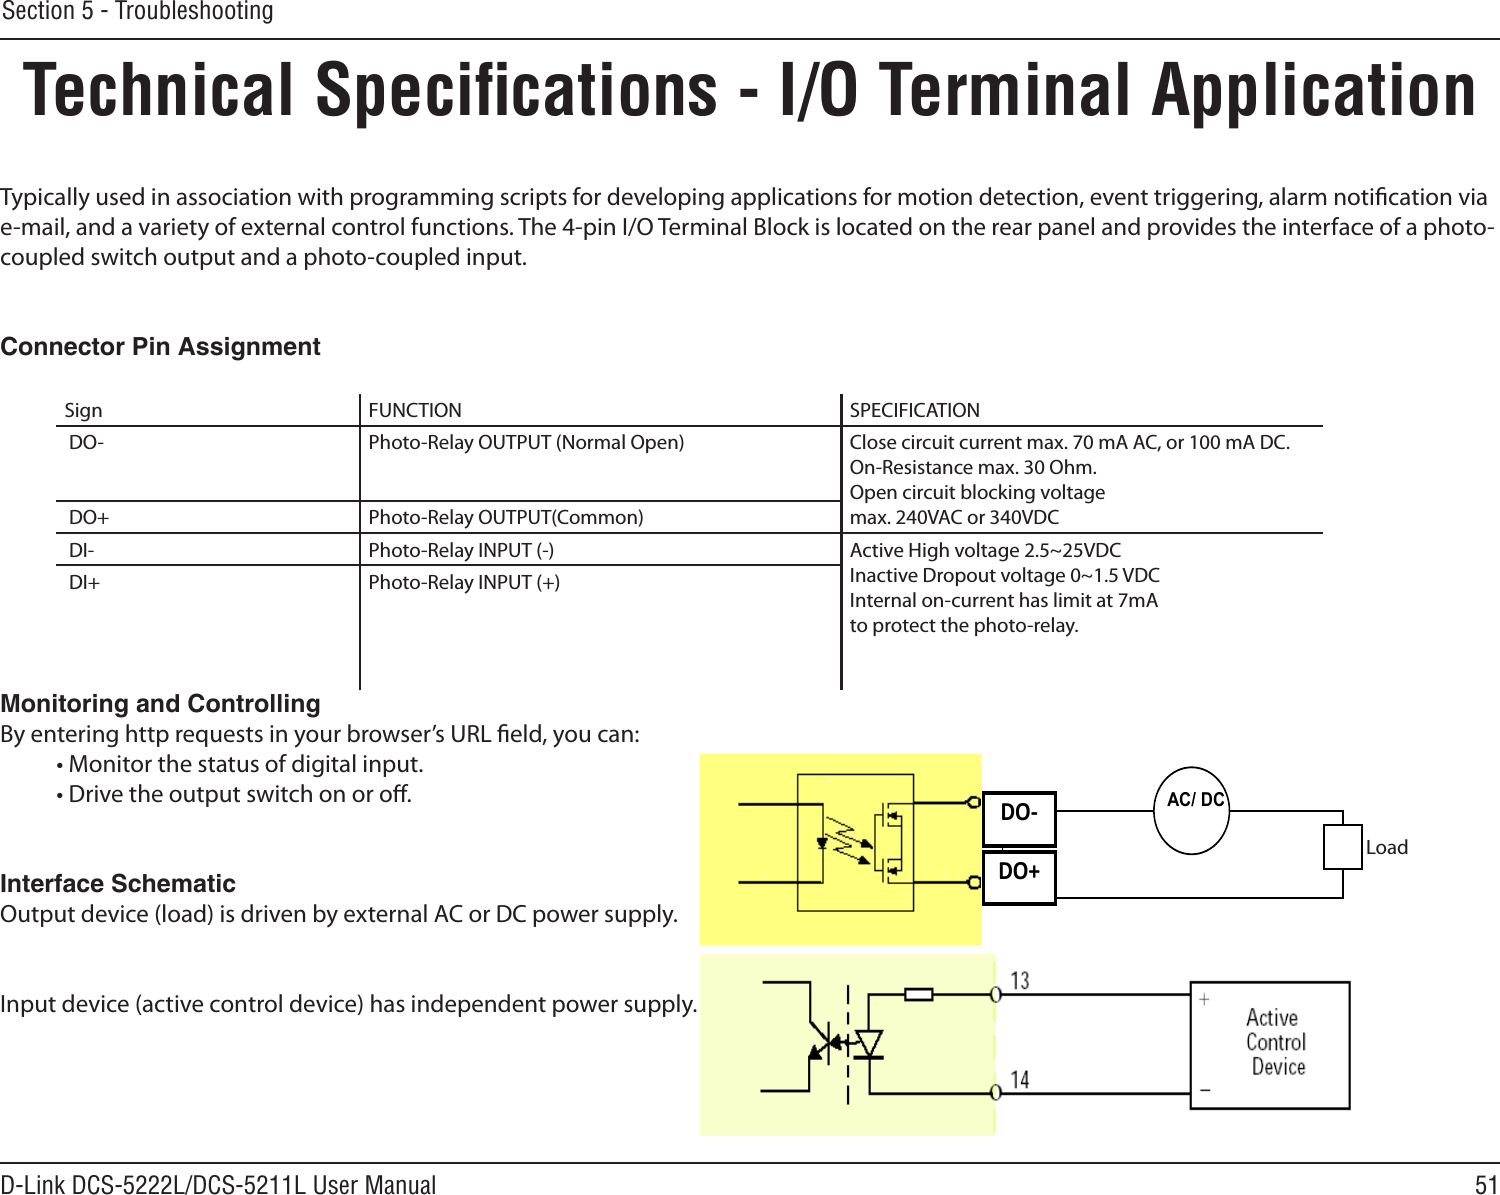 51D-Link DCS-5222L/DCS-5211L User ManualSection 5 - TroubleshootingTechnical Speciﬁcations - I/O Terminal ApplicationTypically used in association with programming scripts for developing applications for motion detection, event triggering, alarm notication via e-mail, and a variety of external control functions. The 4-pin I/O Terminal Block is located on the rear panel and provides the interface of a photo-coupled switch output and a photo-coupled input.Connector Pin AssignmentSign FUNCTION SPECIFICATION DO- Photo-Relay OUTPUT (Normal Open) Close circuit current max. 70 mA AC, or 100 mA DC.On-Resistance max. 30 Ohm.Open circuit blocking voltage max. 240VAC or 340VDC DO+ Photo-Relay OUTPUT(Common) DI- Photo-Relay INPUT (-) Active High voltage 2.5~25VDCInactive Dropout voltage 0~1.5 VDCInternal on-current has limit at 7mA to protect the photo-relay. DI+ Photo-Relay INPUT (+)Monitoring and ControllingBy entering http requests in your browser’s URL eld, you can:  • Monitor the status of digital input.  • Drive the output switch on or o.Interface SchematicOutput device (load) is driven by external AC or DC power supply.Input device (active control device) has independent power supply. DO- DO+ AC/ DC Load